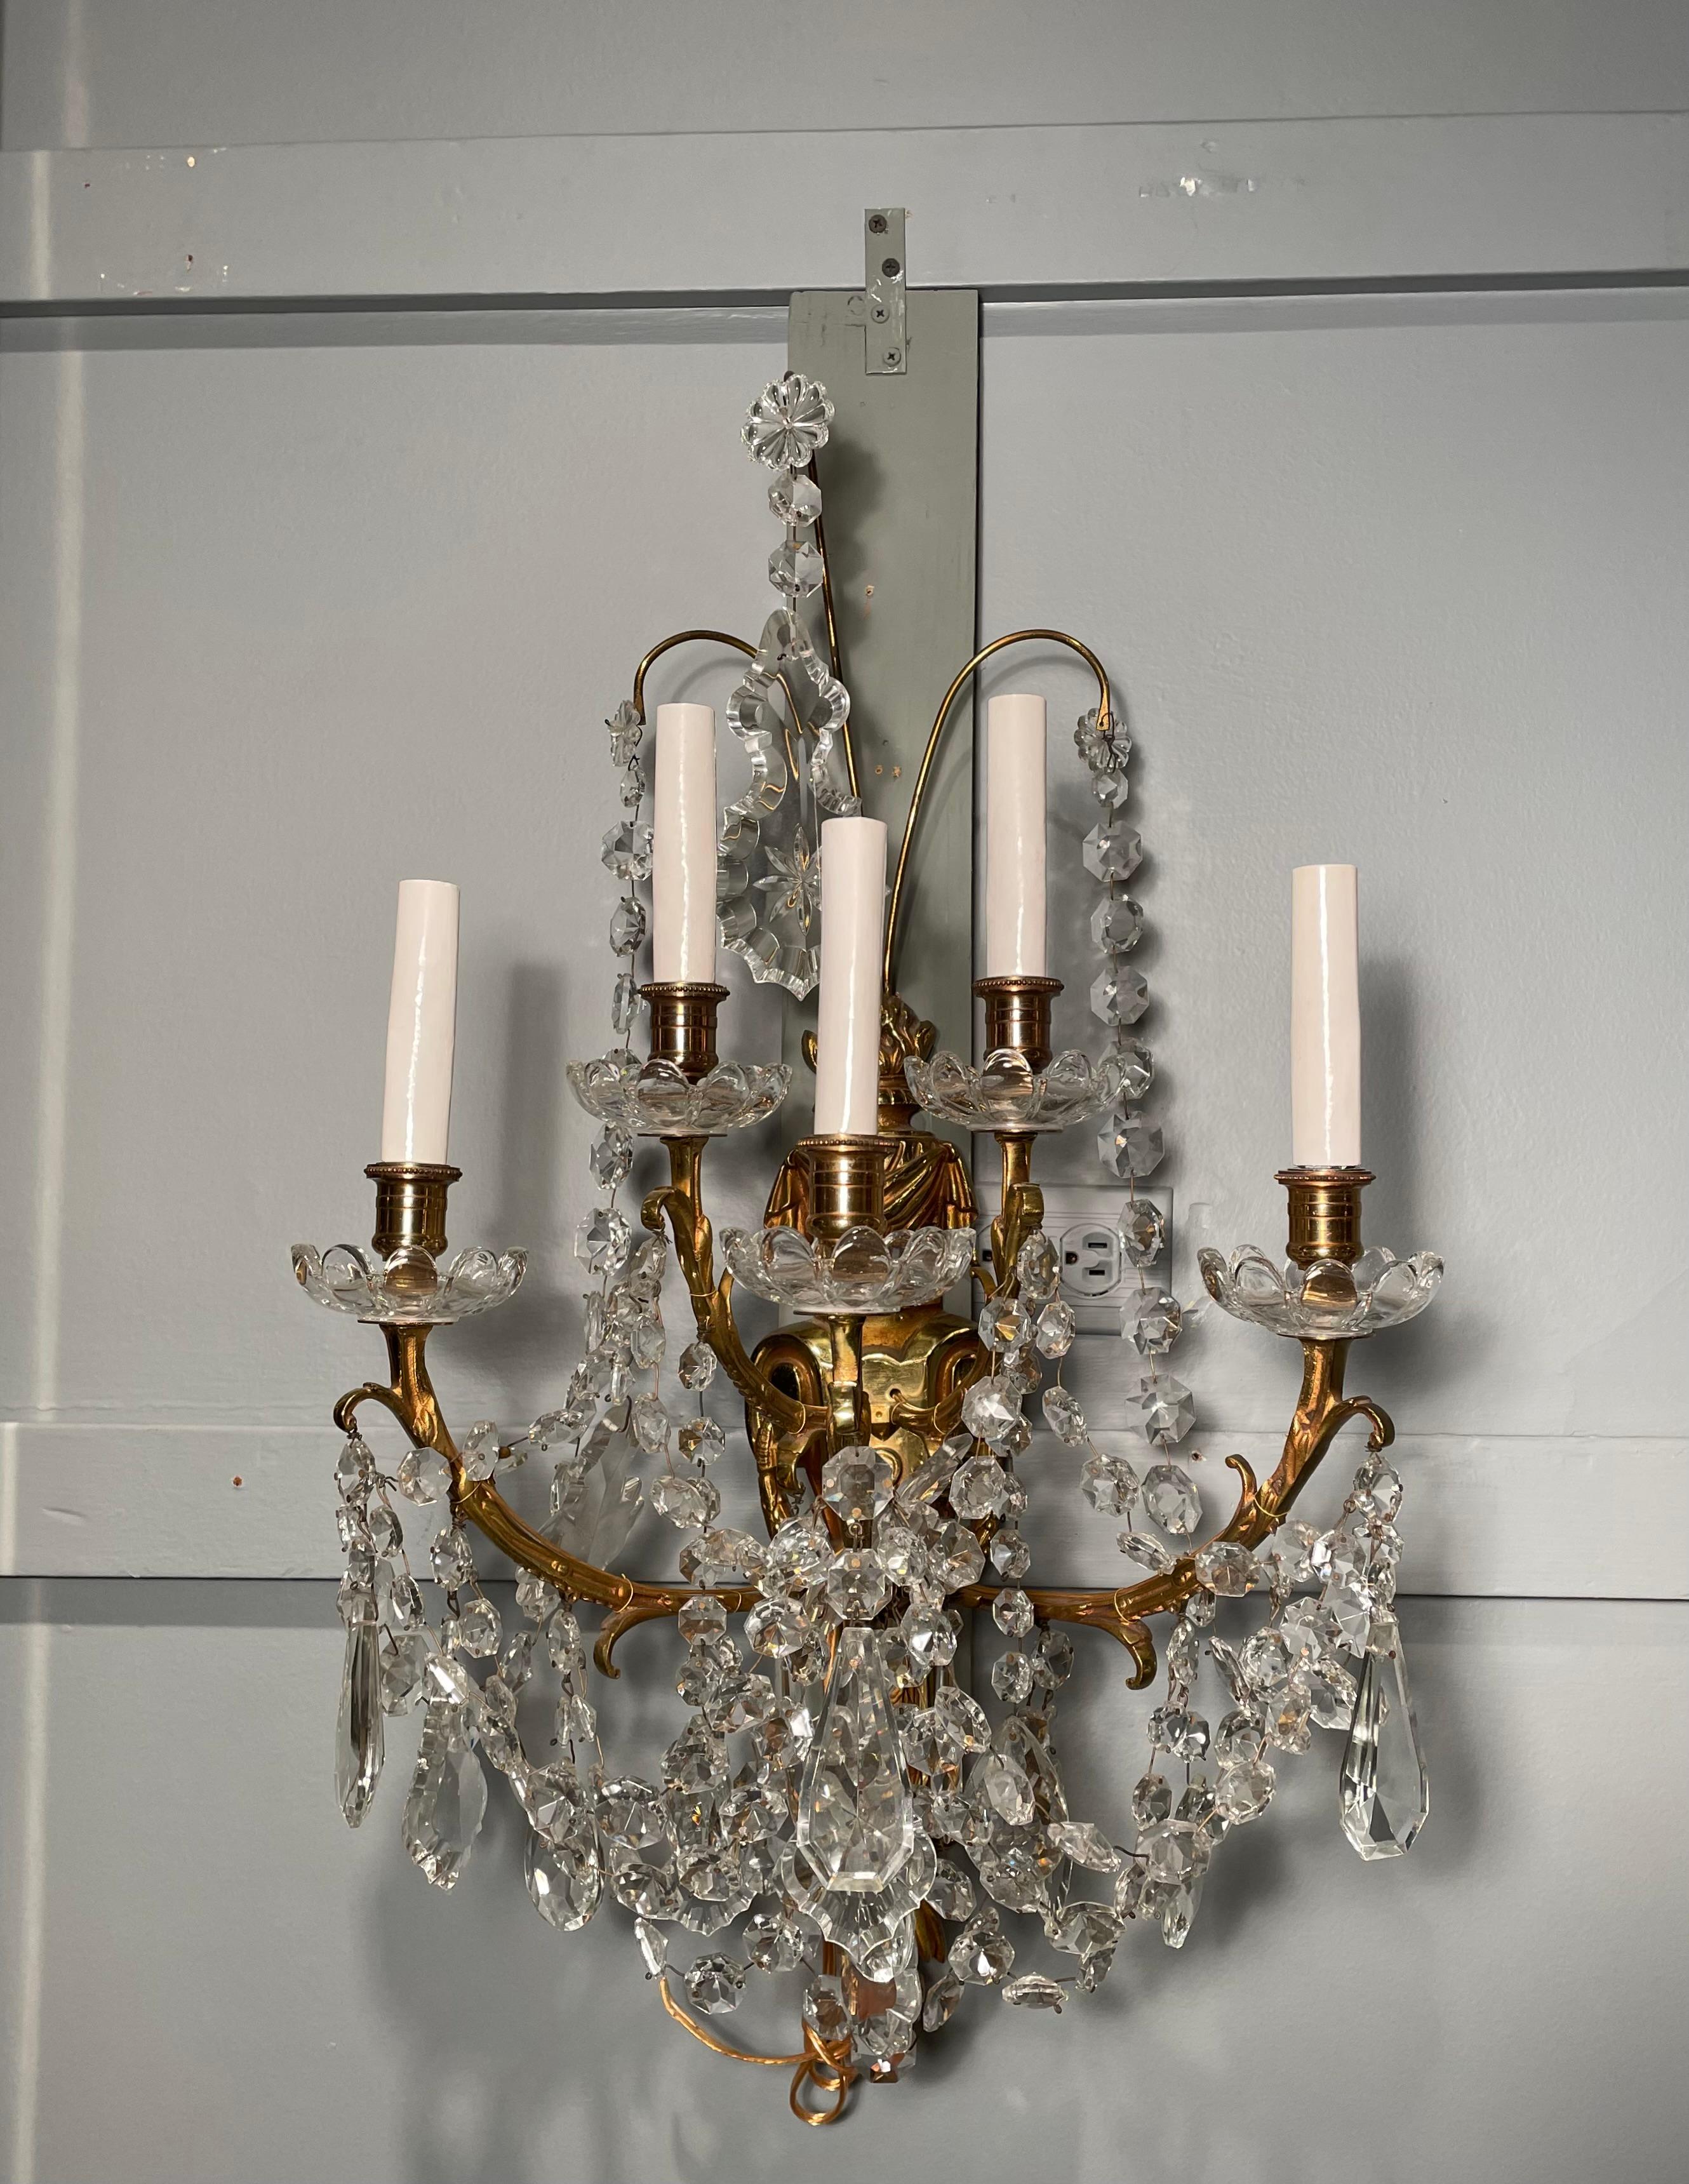 Pair of Antique French Crystal Five Light Sconces.